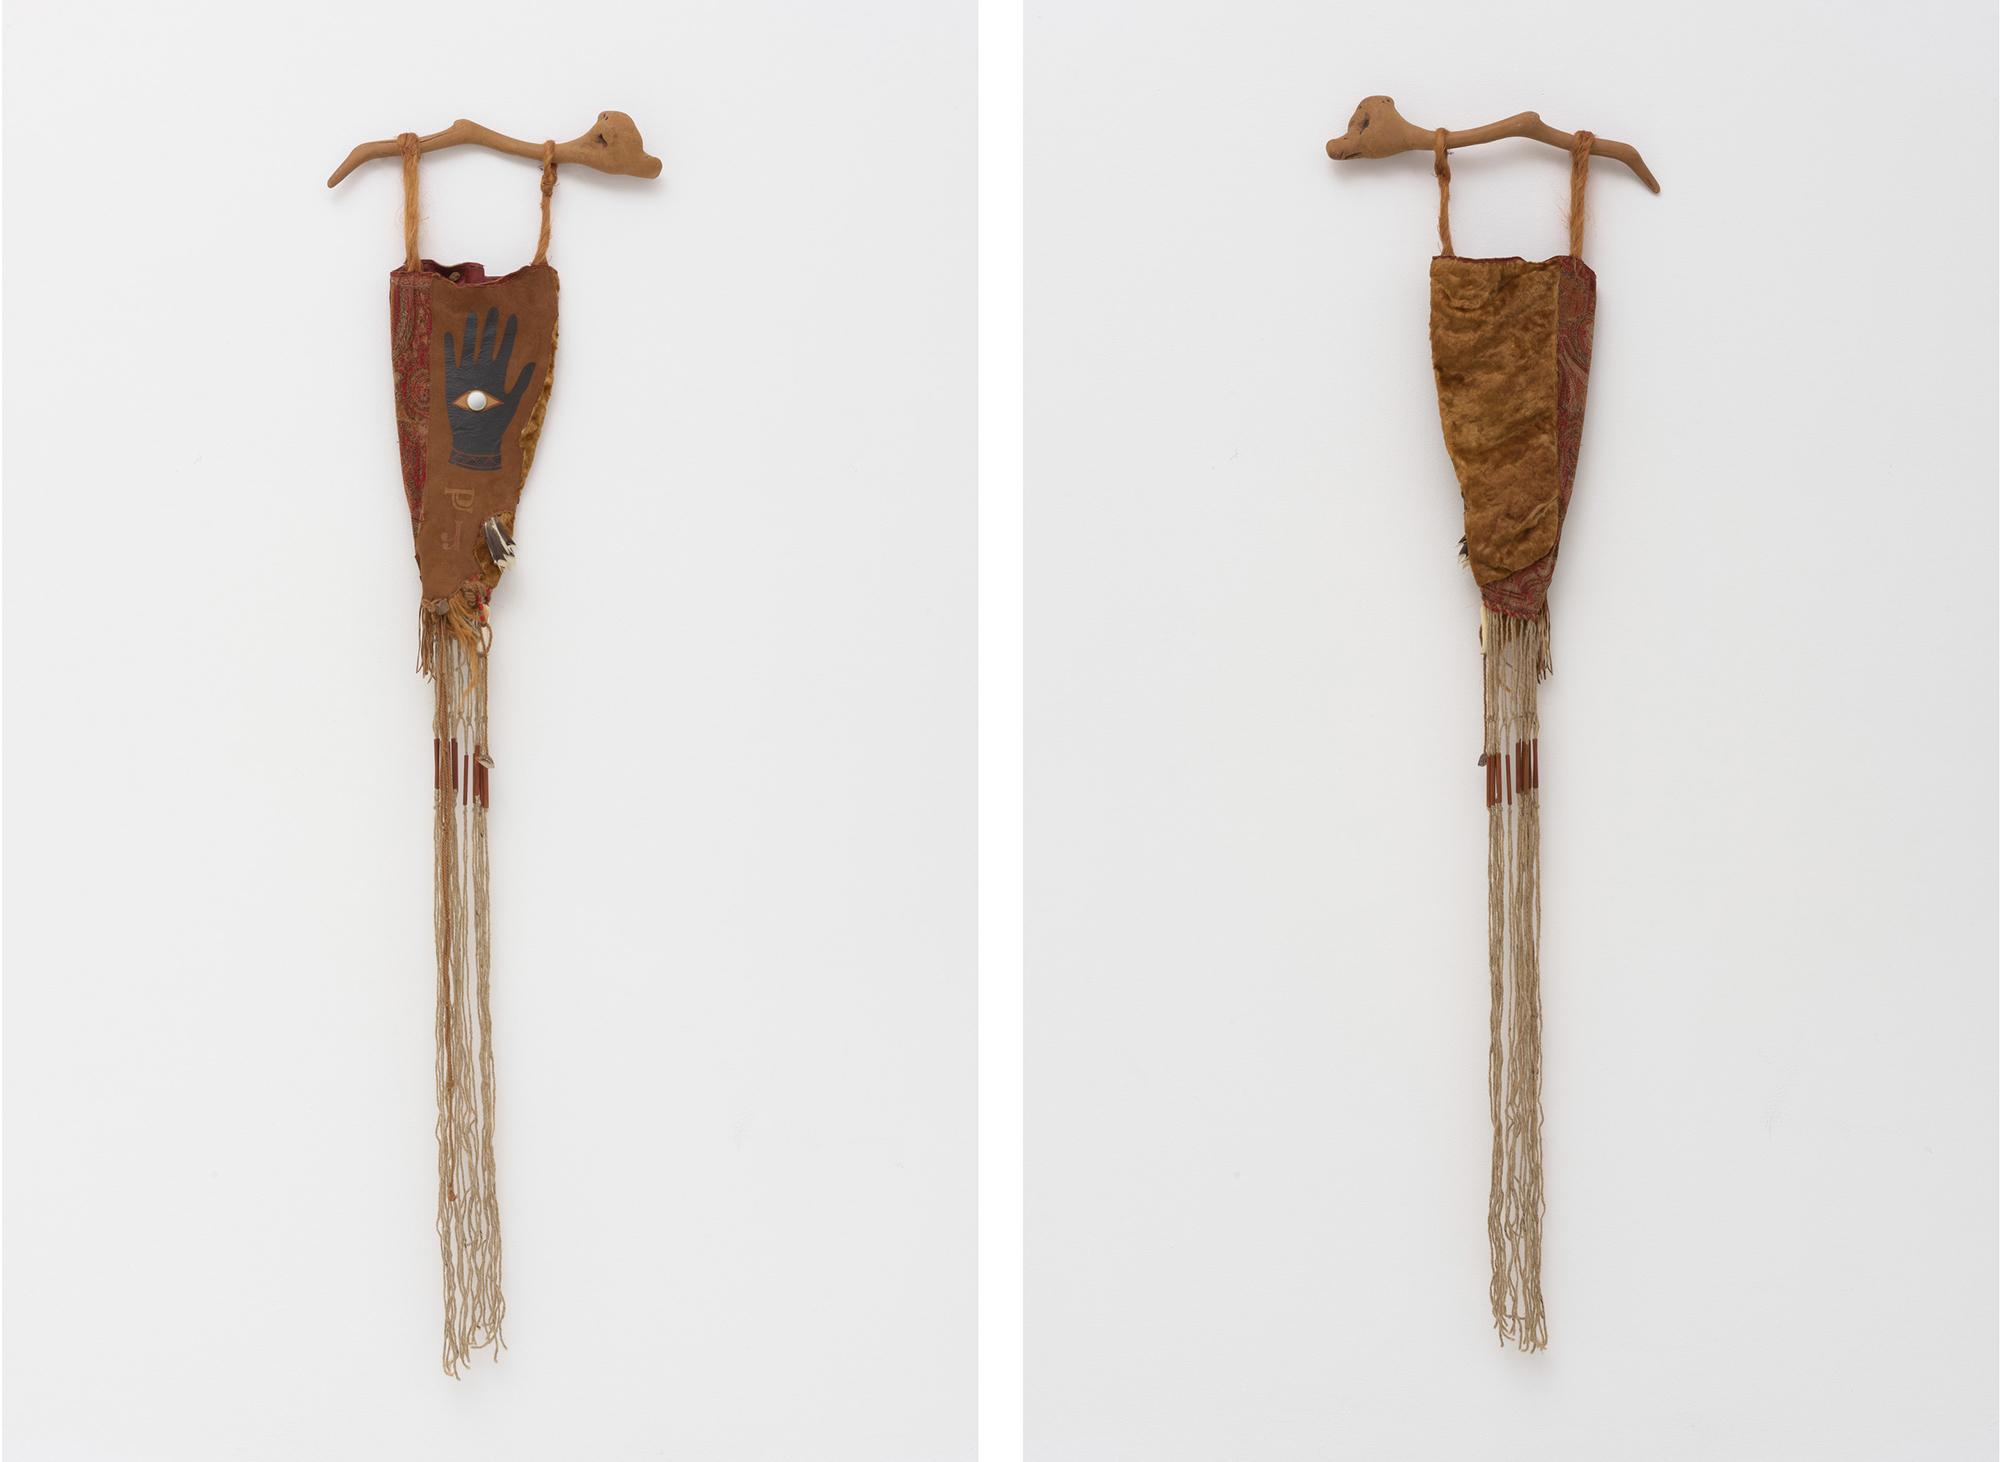 Betye Saar, Mojo Bag #1 Hand (front on left, back on right), 1970, Los Angeles County Museum of Art, purchased with funds provided by Alice and Nahum Lainer, the Modern Art Acquisition Fund, the Modern and Contemporary Art Council Fund, the Laurie M. Tisch Illumination Fund in honor of Betye Saar and Steve Tisch, Francis H. Williams and Keris A. Salmon, H. Allen Evans and Anna Rosicka, and Kim and Keith Allen-Niesen, © Betye Saar, courtesy of the artist and Roberts Projects, Los Angeles, California, photo by Robert Wedemeyer